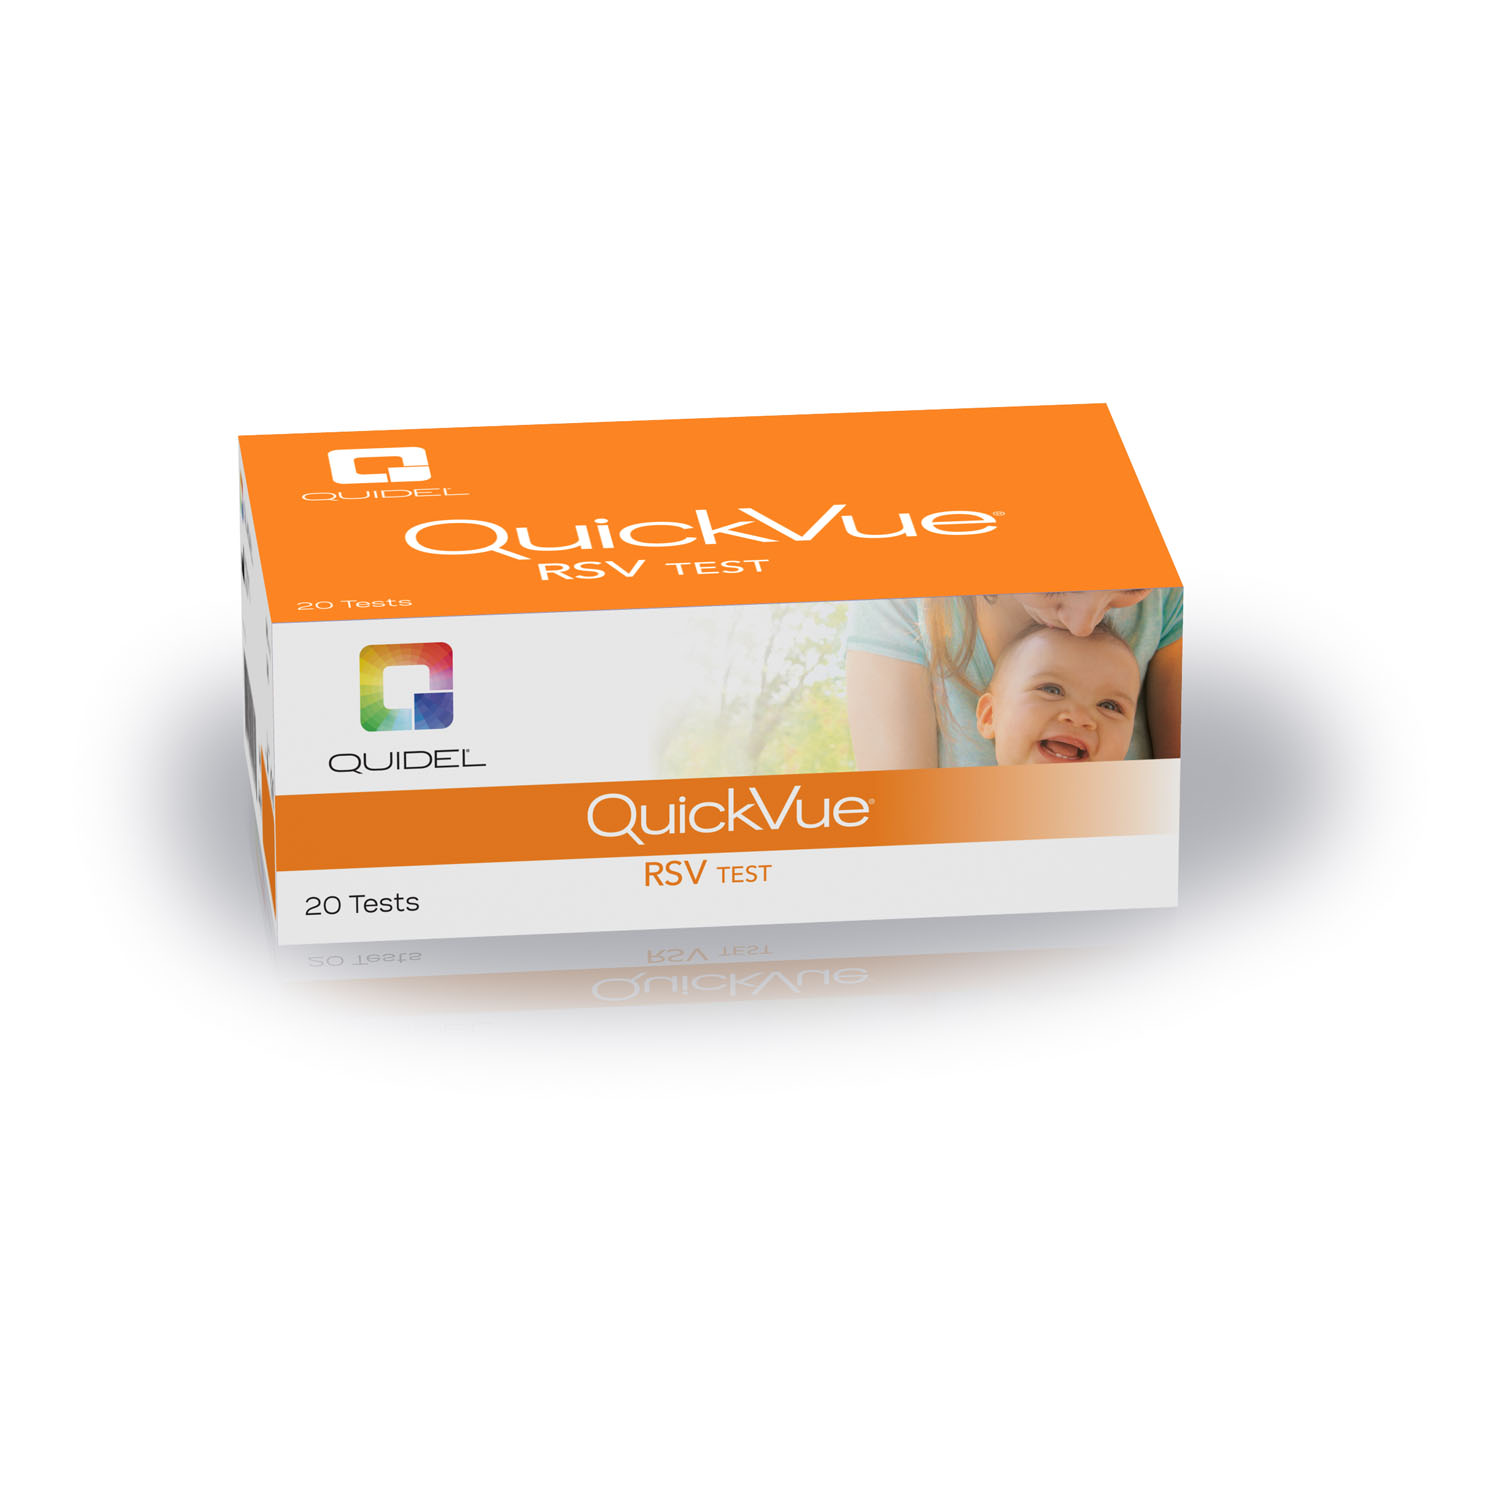 QUIDEL QUICKVUE RESPIRATORY SYNCYTIAL VIRUS (RSV) : 20193 KT $279.77 Stocked